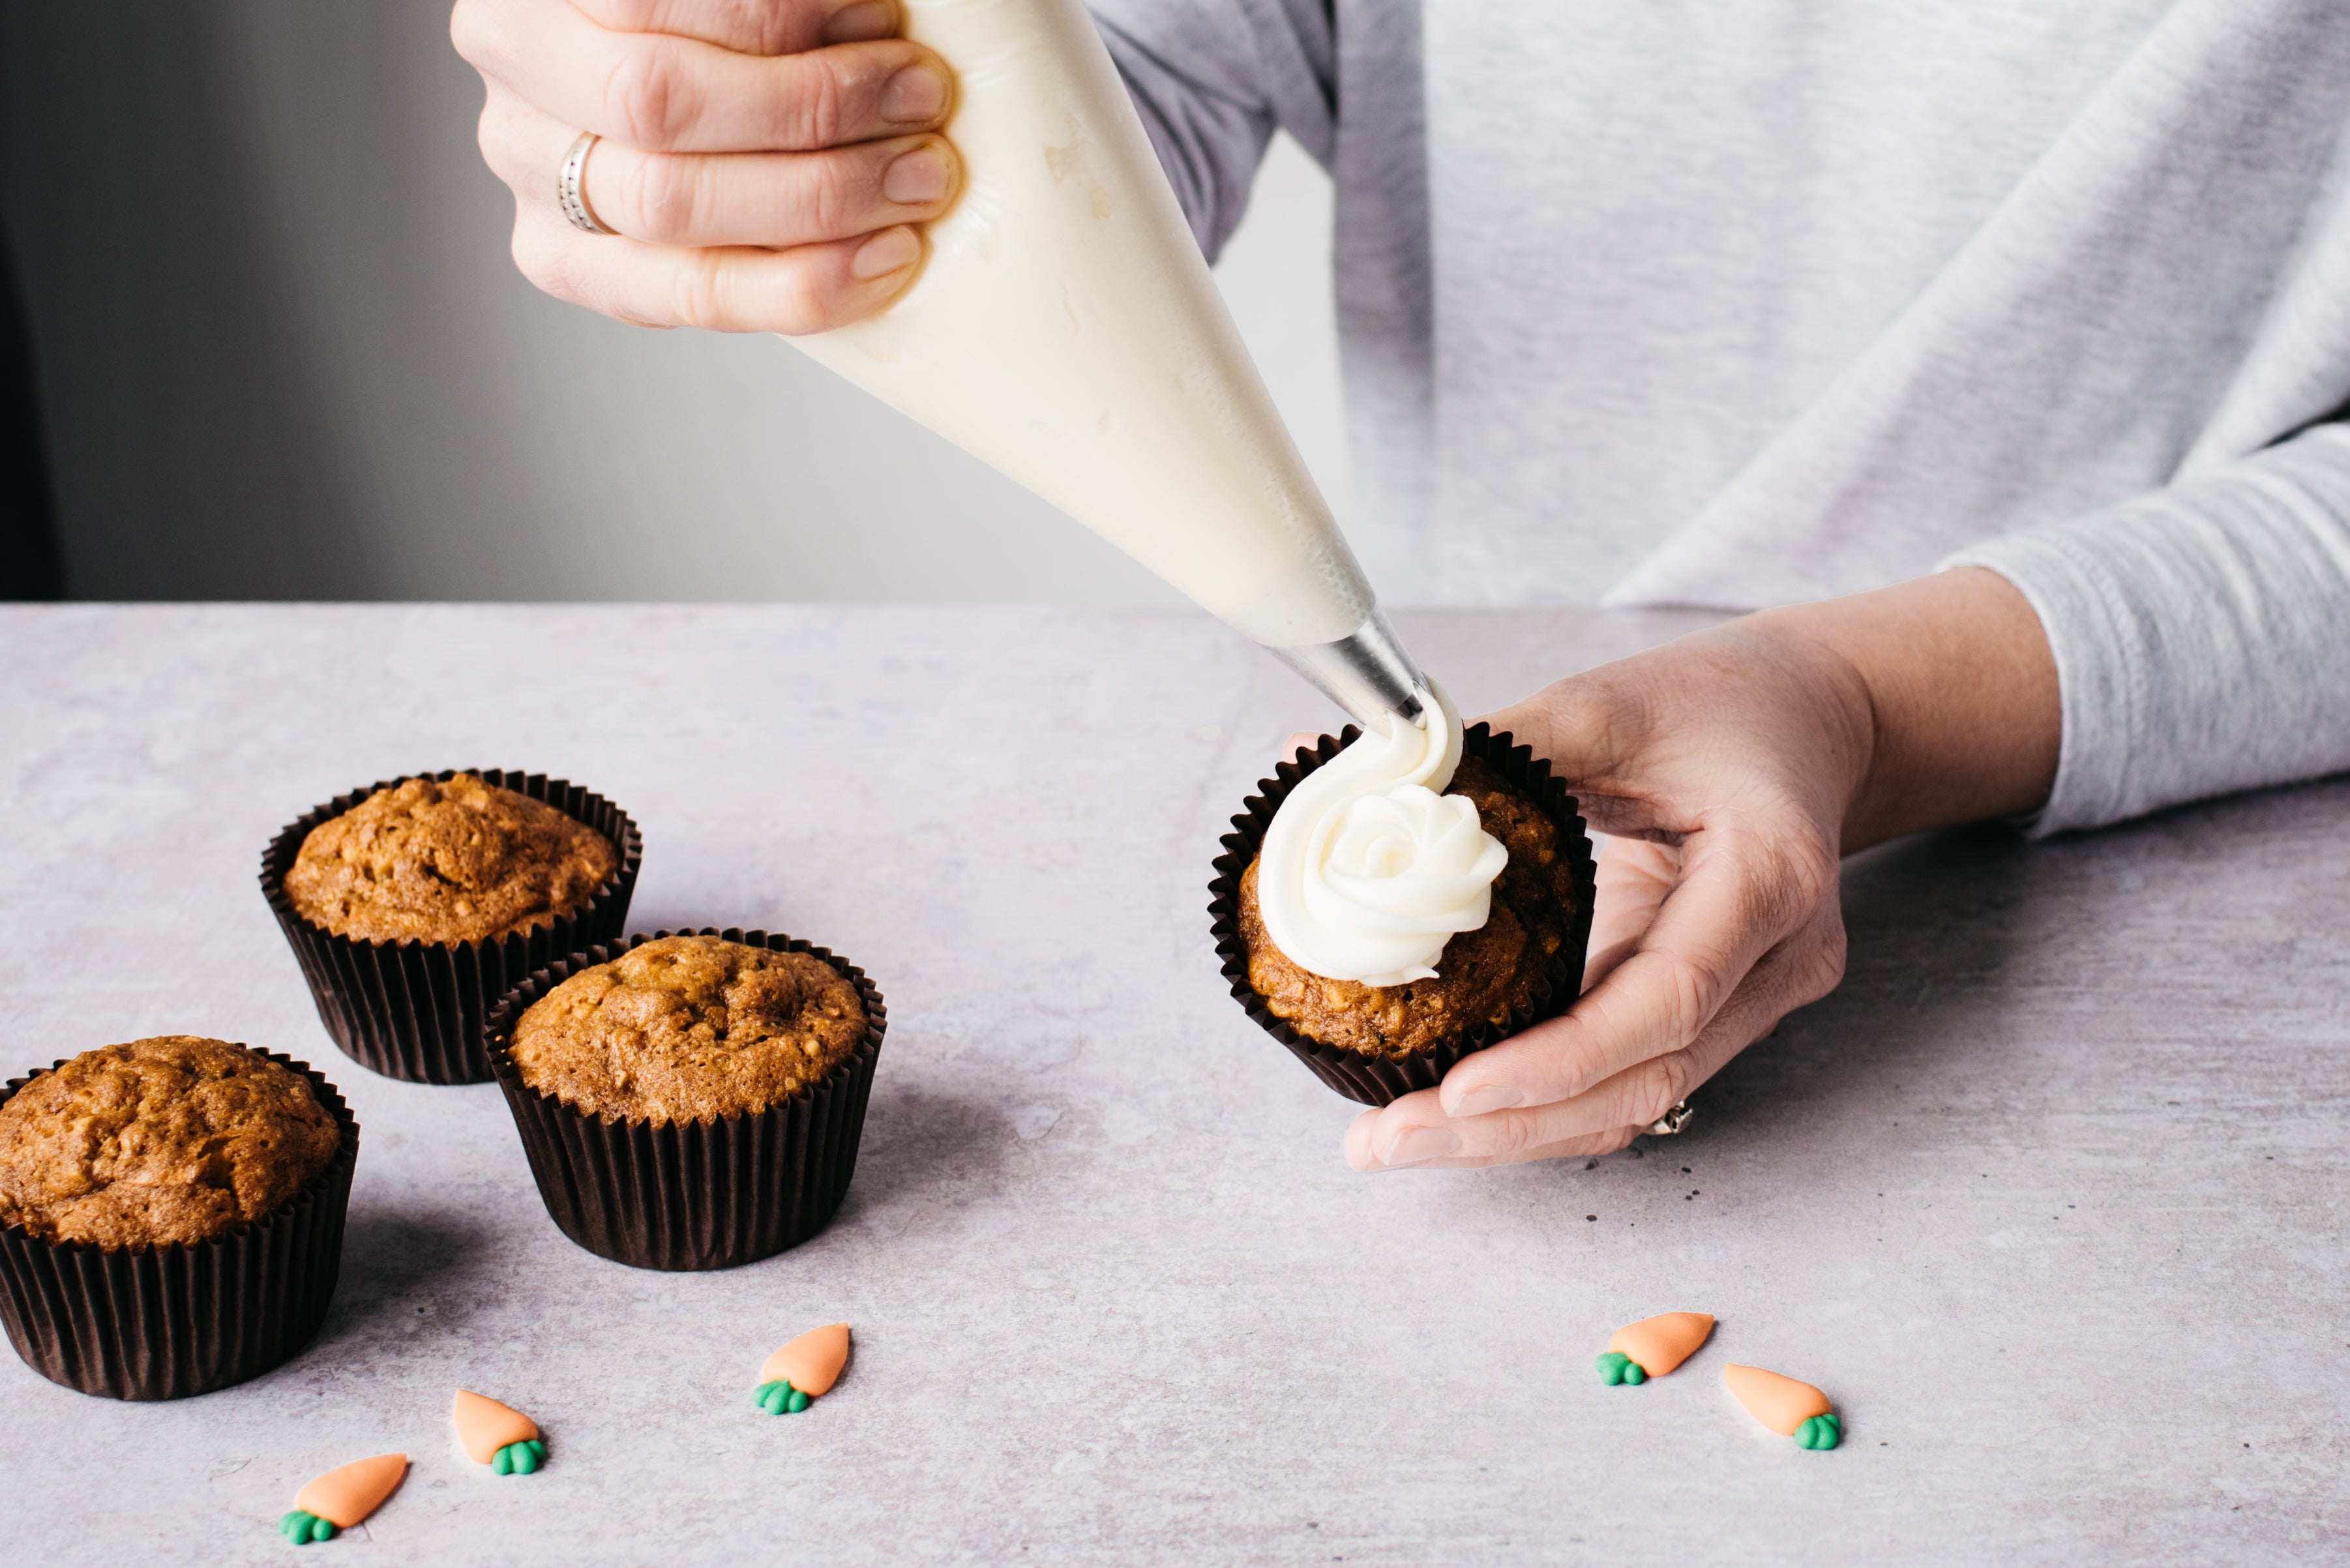 Carrot cake cupcakes being topped with cream cheese frosting from a piping bag